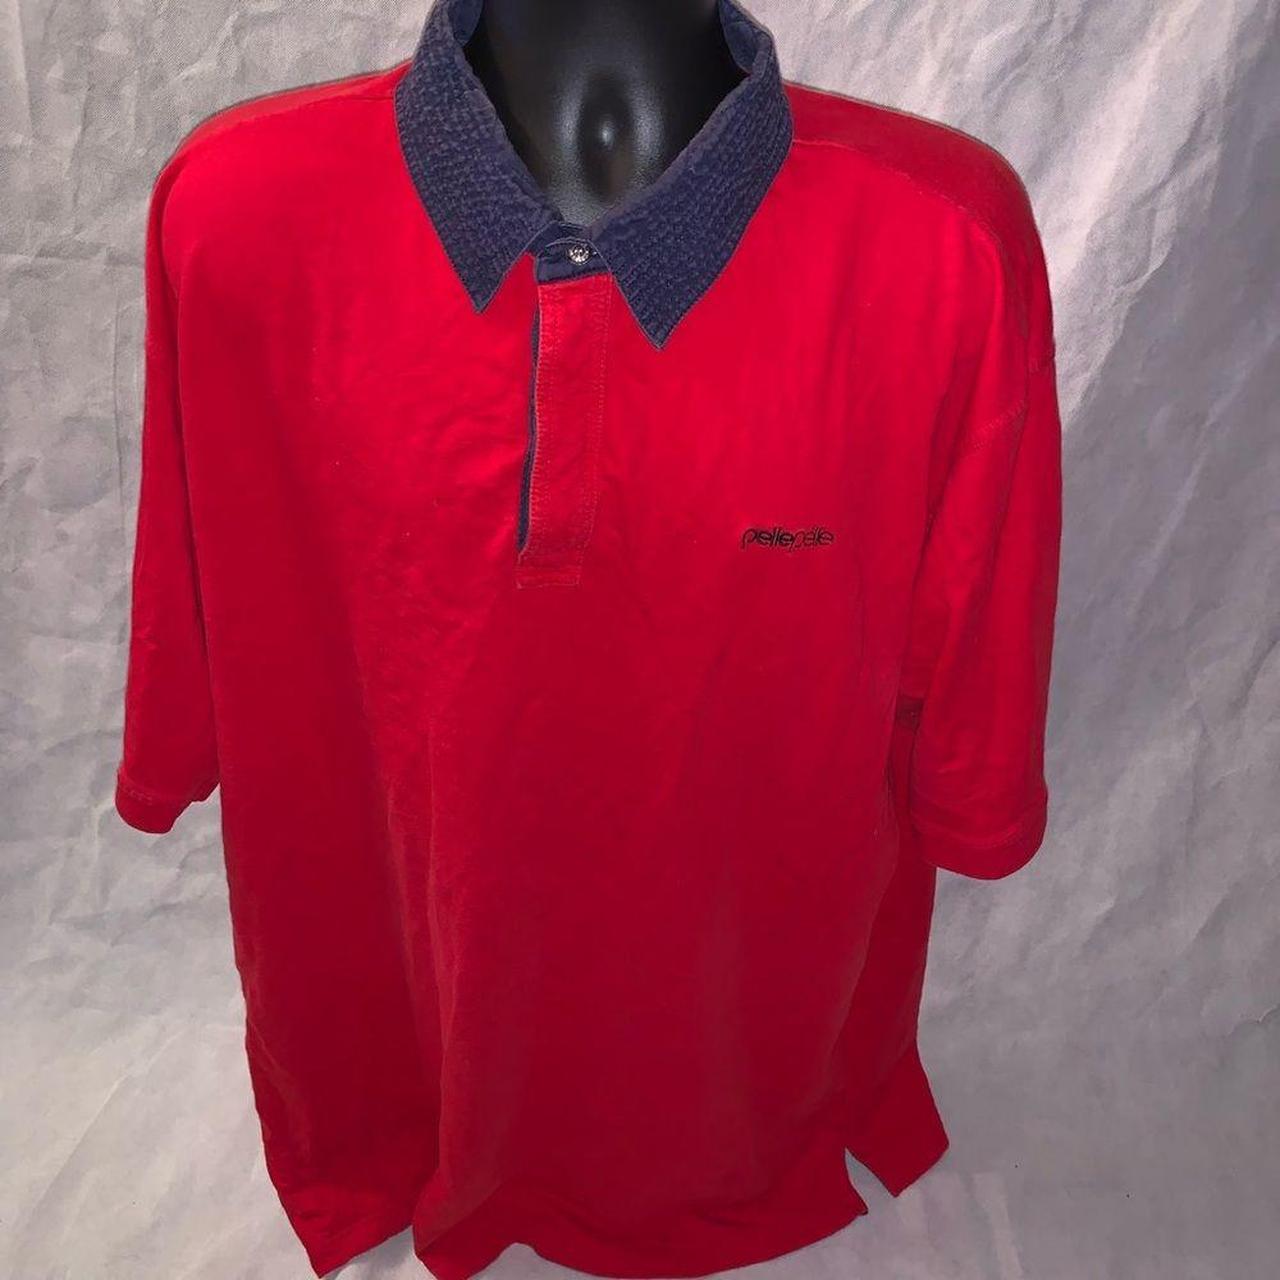 Product Image 1 - pellepelle Polo Shirt
Size 4XL
1978 
Marc